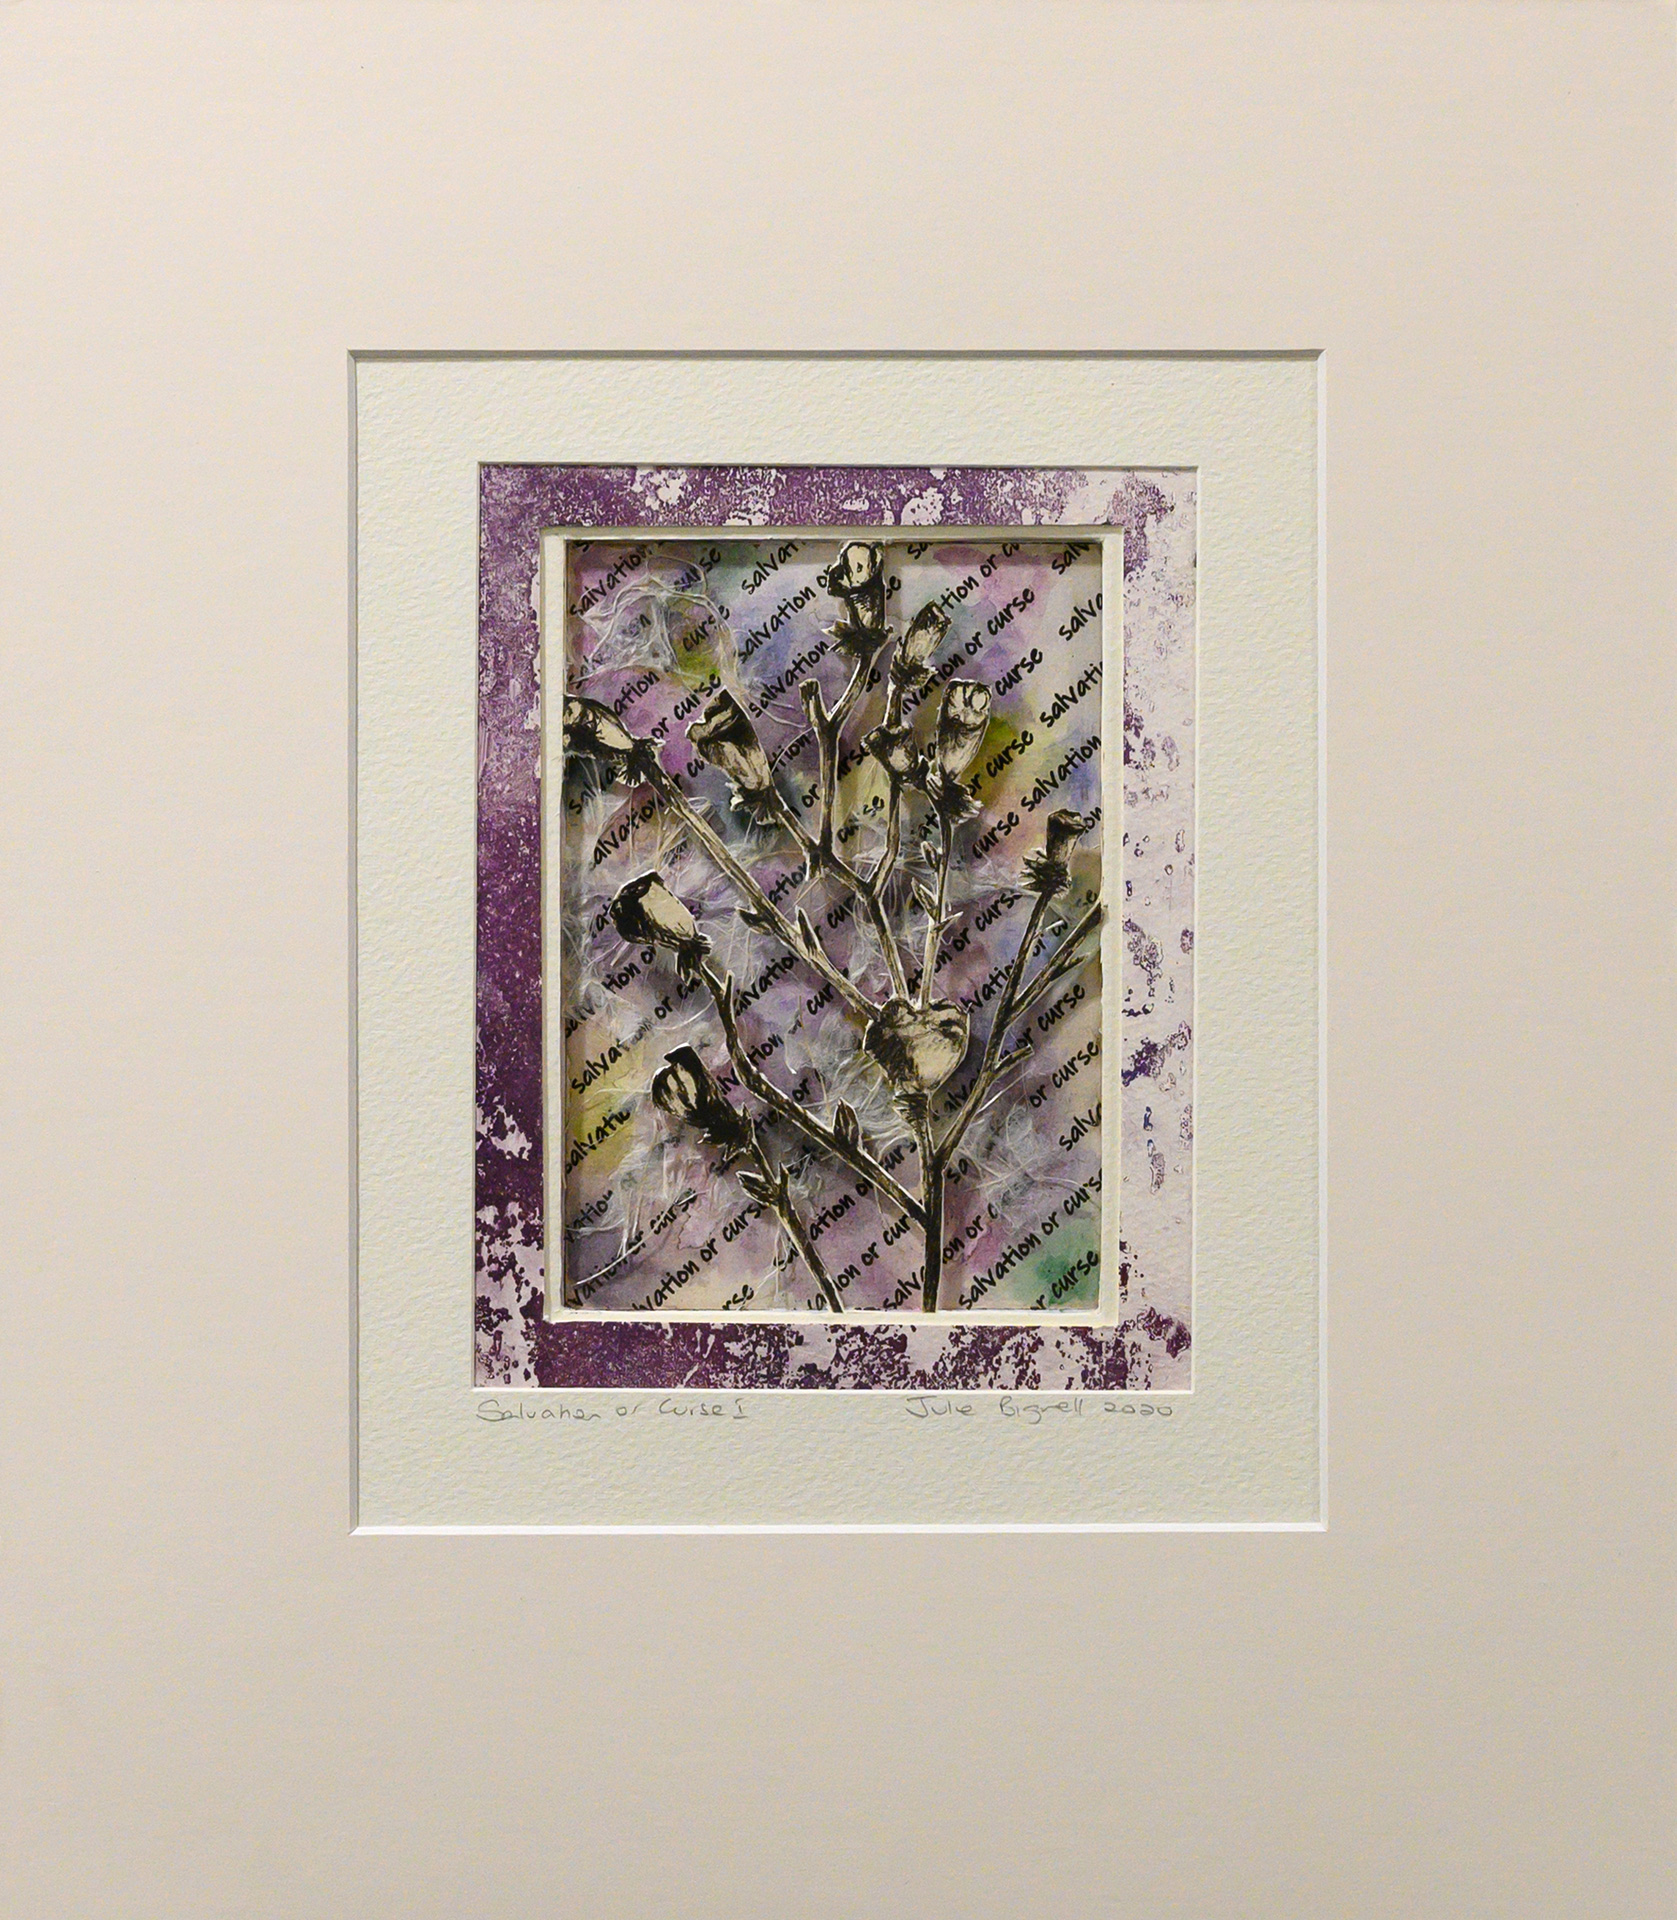 Unframed artwork by Julie Bignell of a b&w flower cut out in the foreground with textured multi-coloured print in the background and a printed purple border